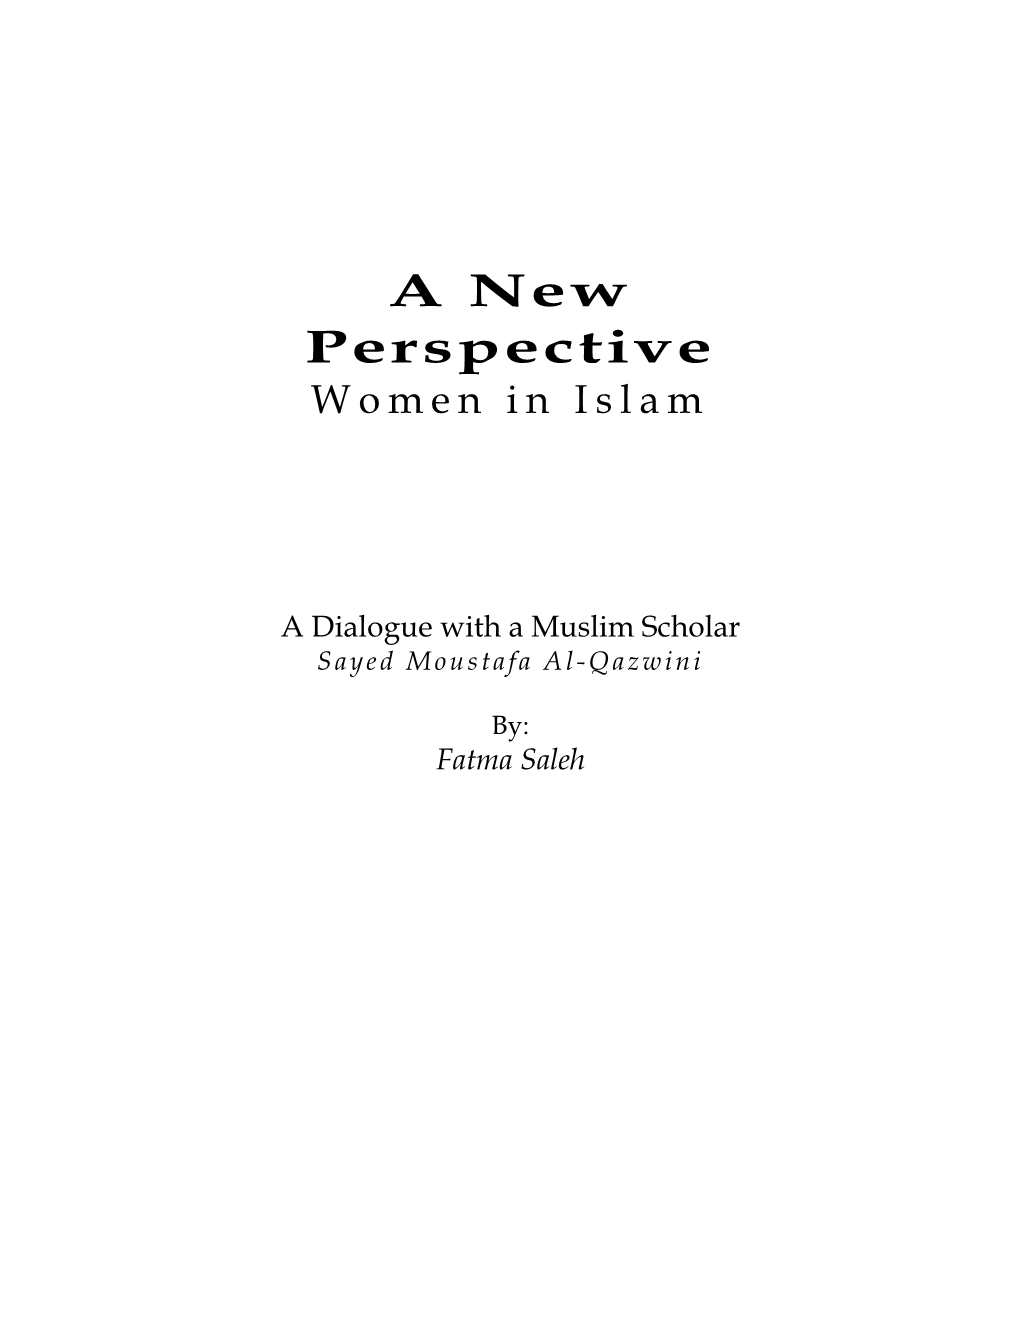 A New Perspective-Women in Islam